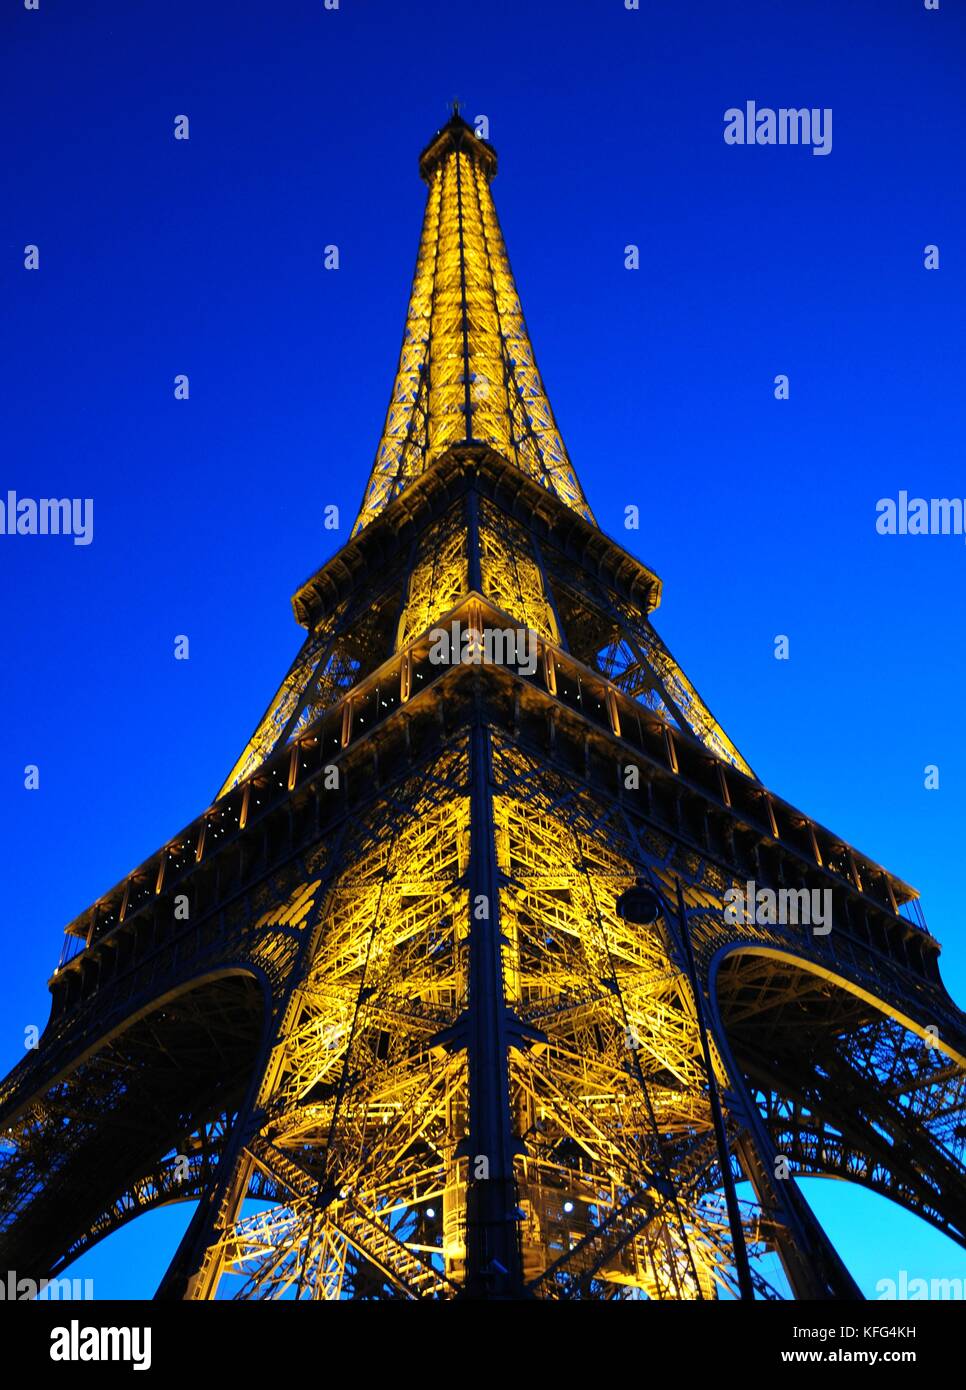 Illuminated Eiffel Tower in Paris France at dusk. Famous artistic iron work. Architecture Abstract Stock Photo